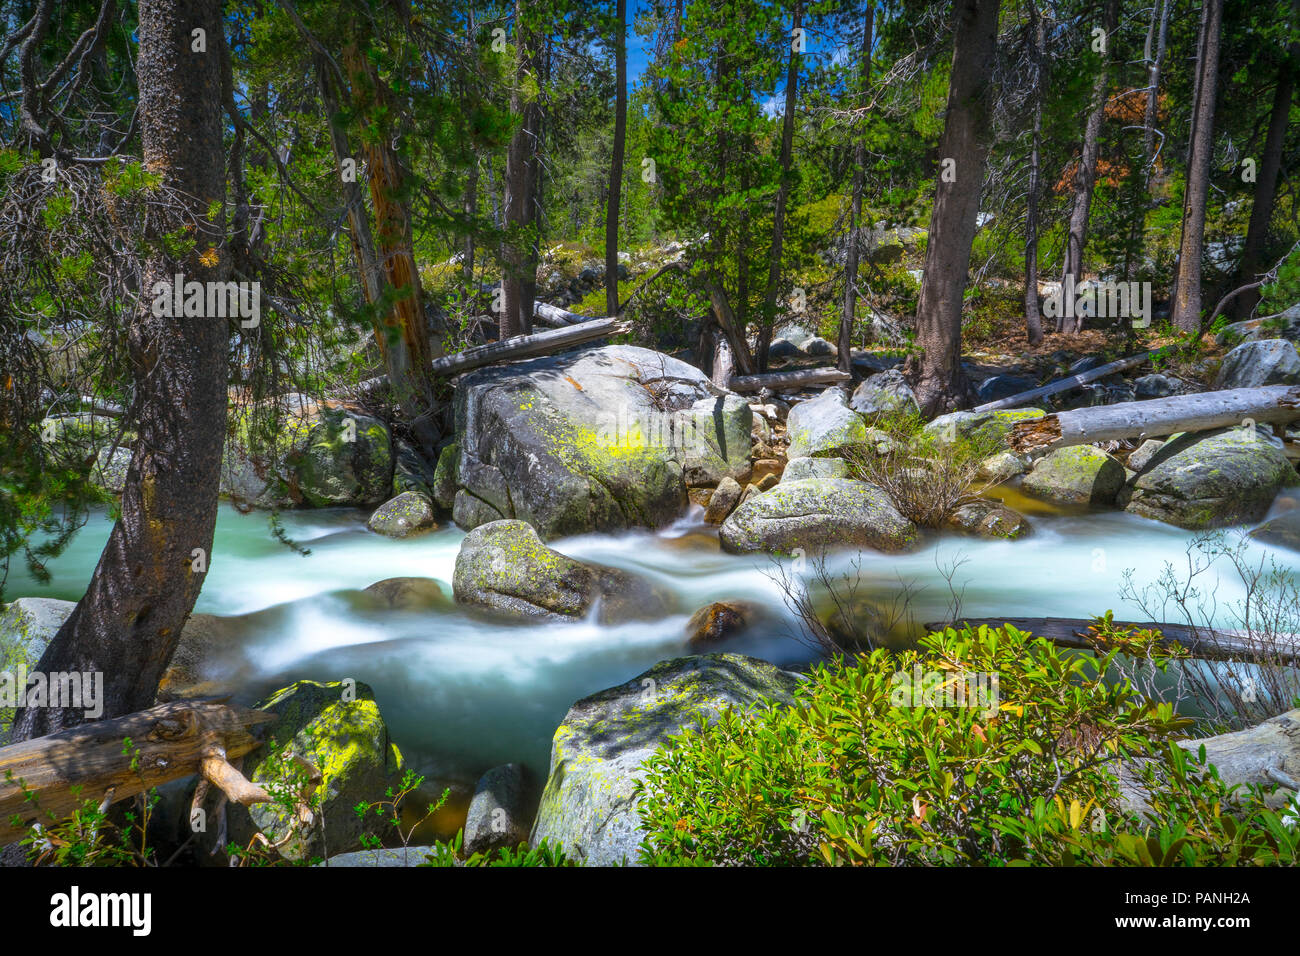 Yosemite Creek's turquoise water rapids flowing over large boulders in the forest along Tioga Pass - Yosemite National Park Landscapes Stock Photo